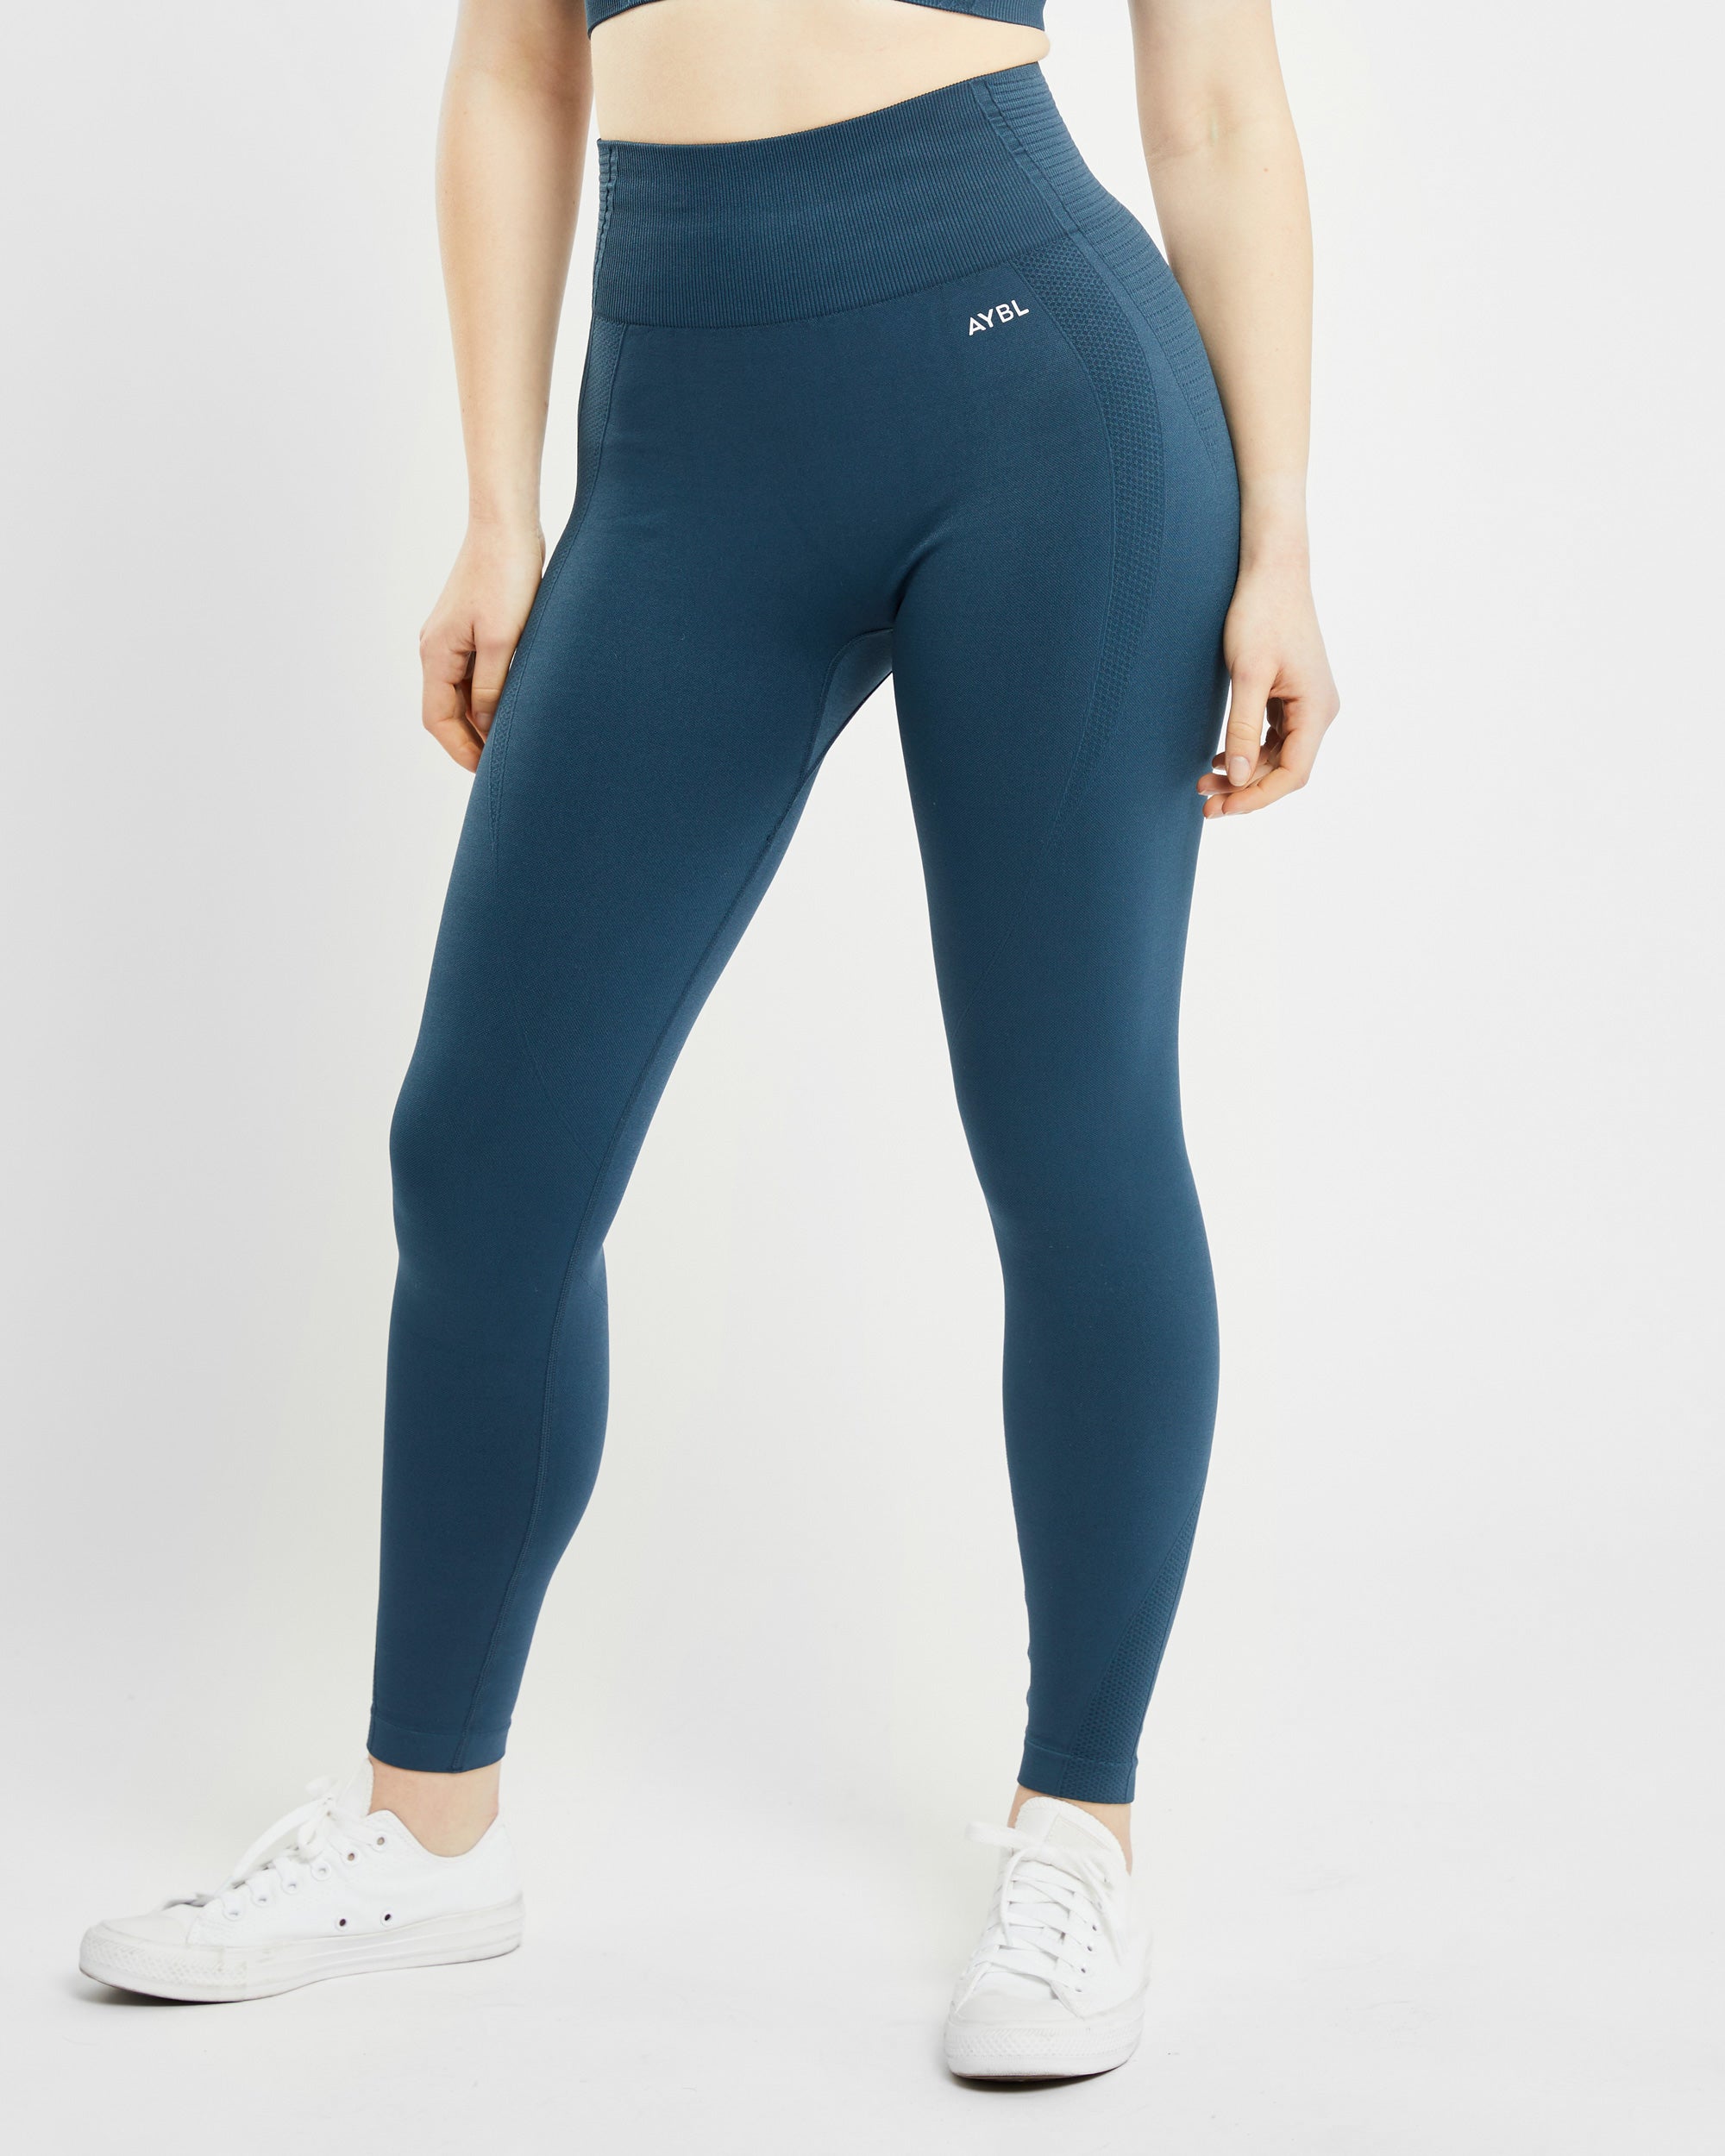 AYBL Core Leggings Blue Size M - $24 (46% Off Retail) New With Tags - From  Princess